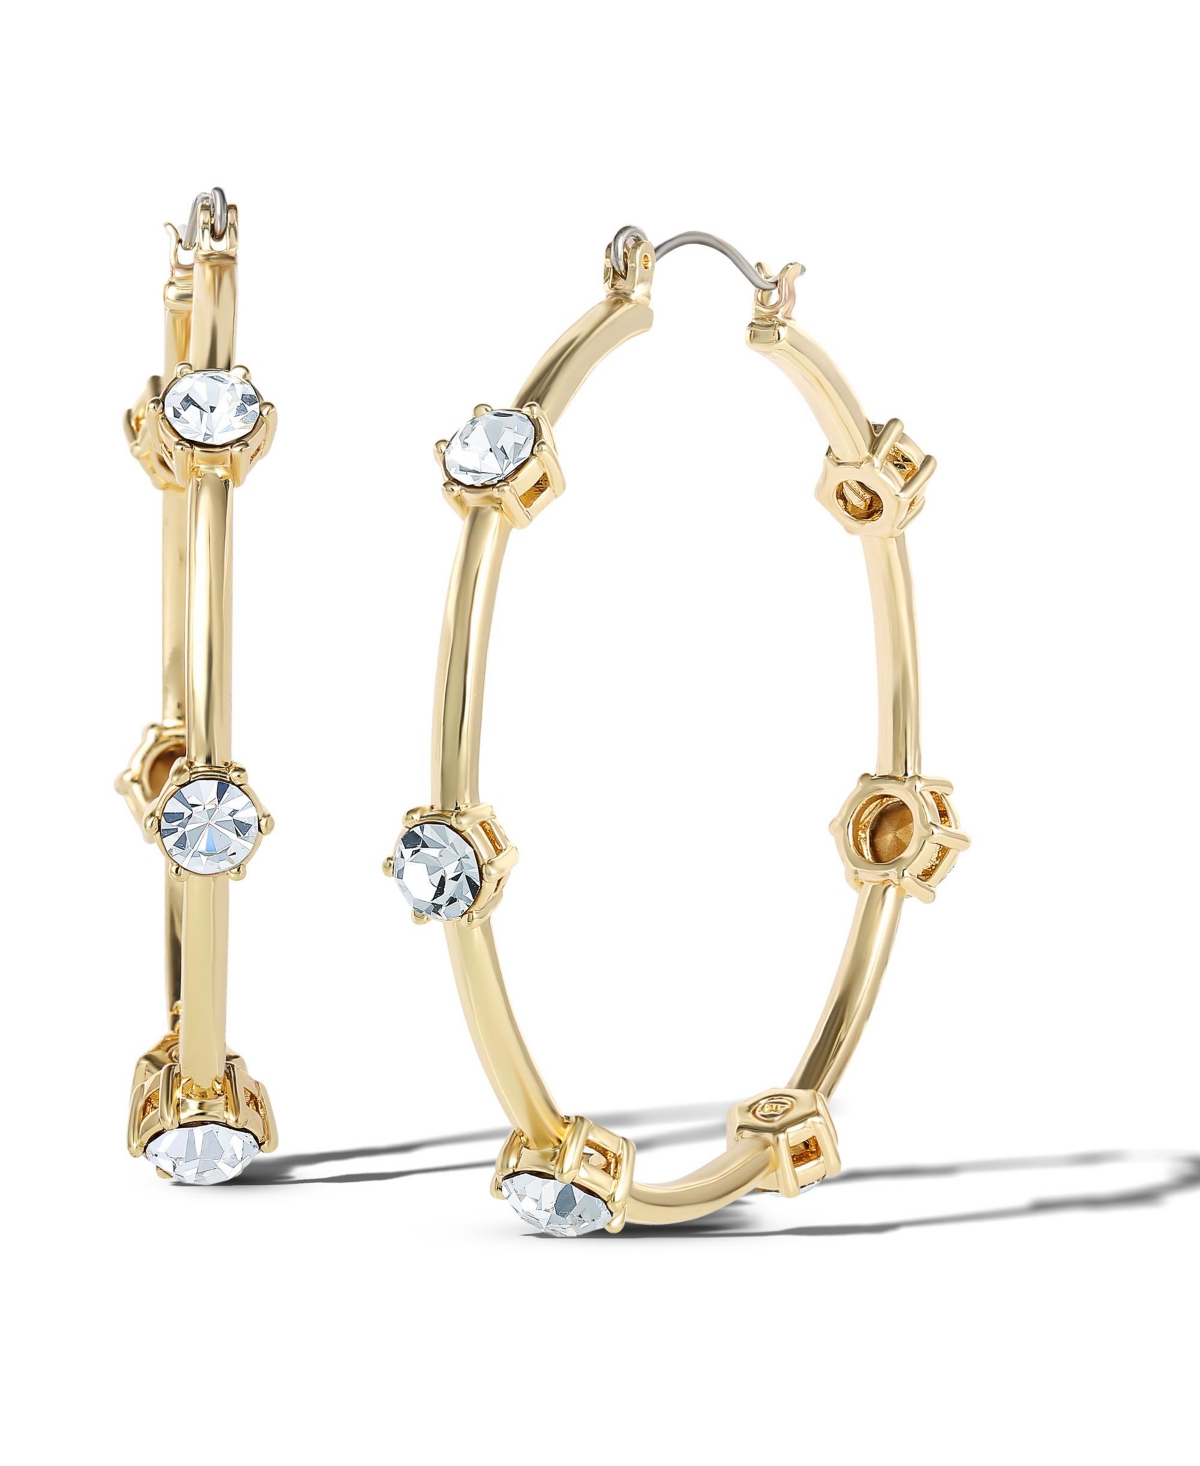 Womens Drop and Hoop Earrings - Gold-Tone Earrings with Crystal Embellishments - Gold